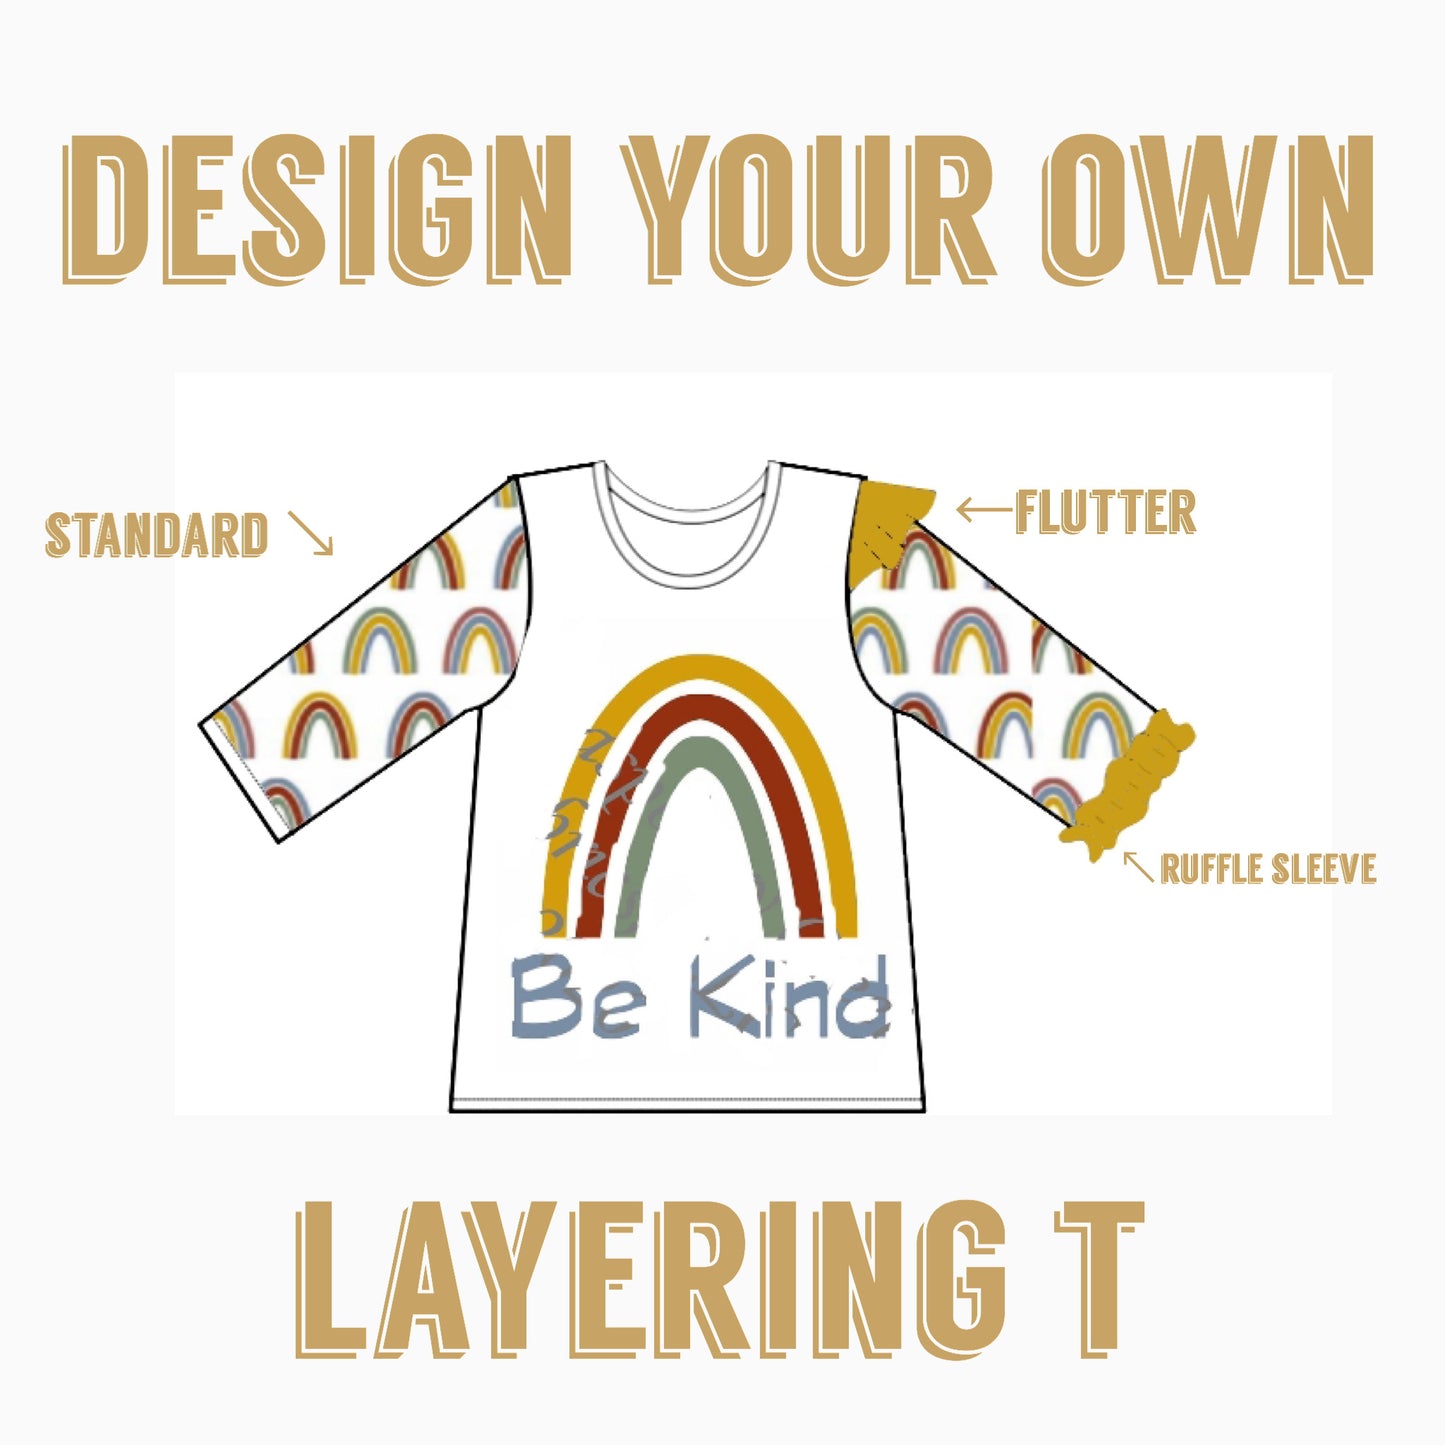 Design your own| Layering T